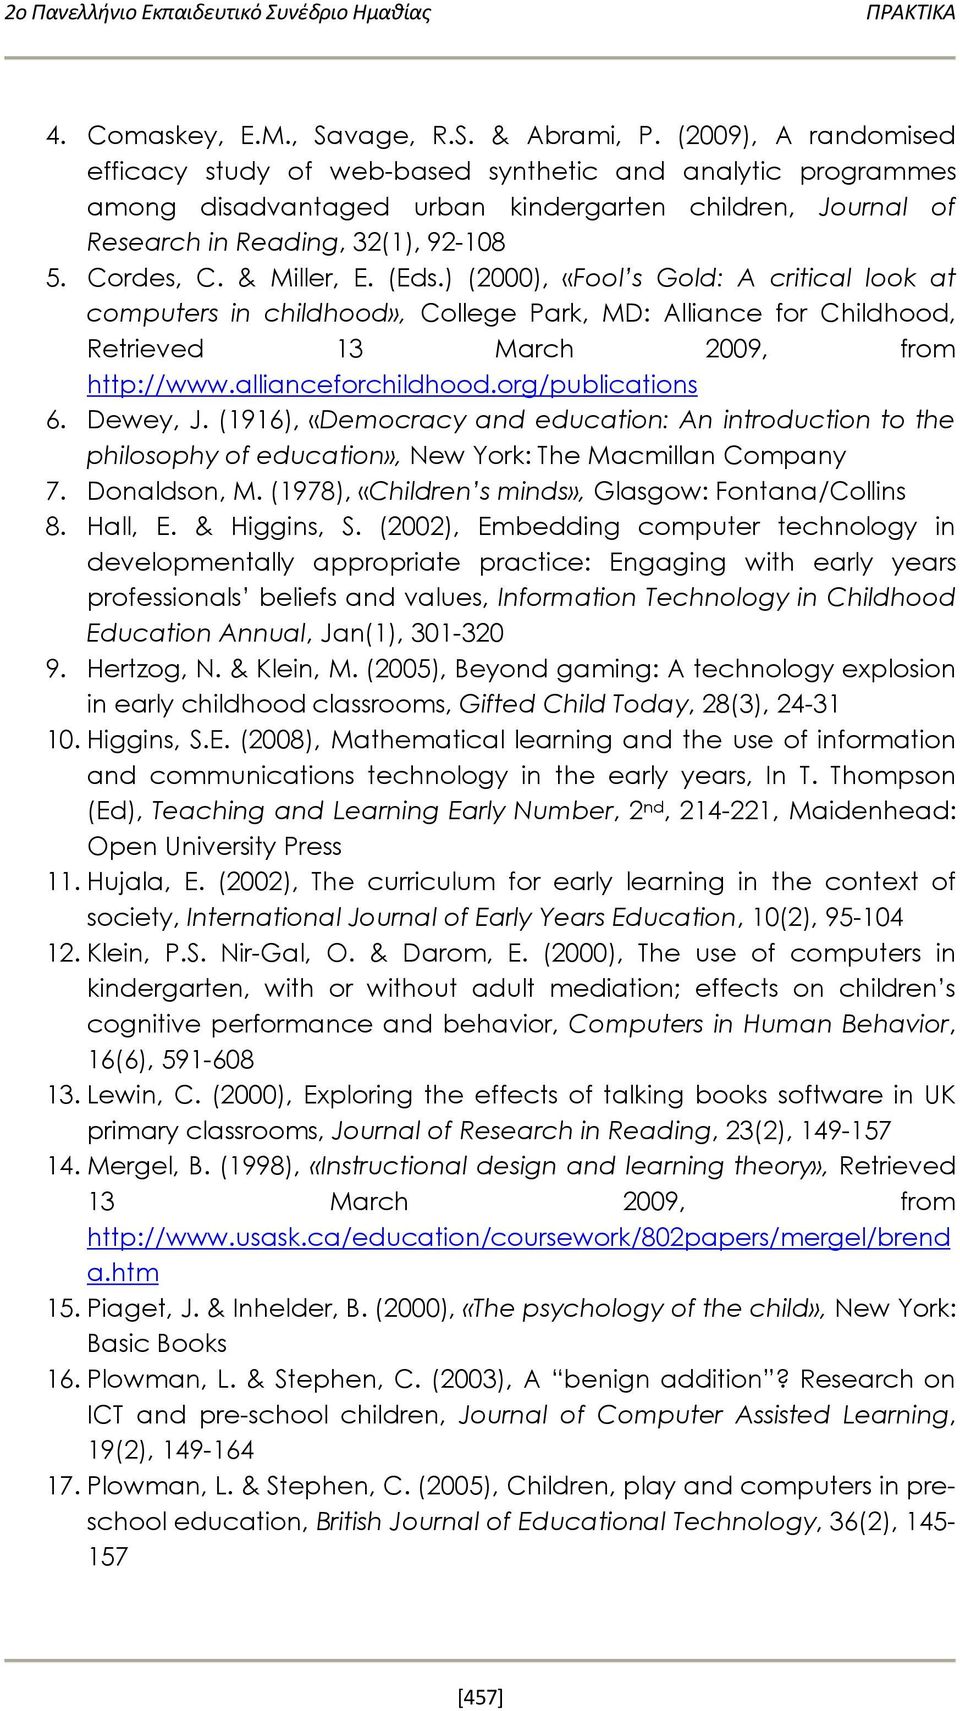 & Miller, E. (Eds.) (2000), «Fool s Gold: A critical look at computers in childhood», College Park, MD: Alliance for Childhood, Retrieved 13 March 2009, from http://www.allianceforchildhood.